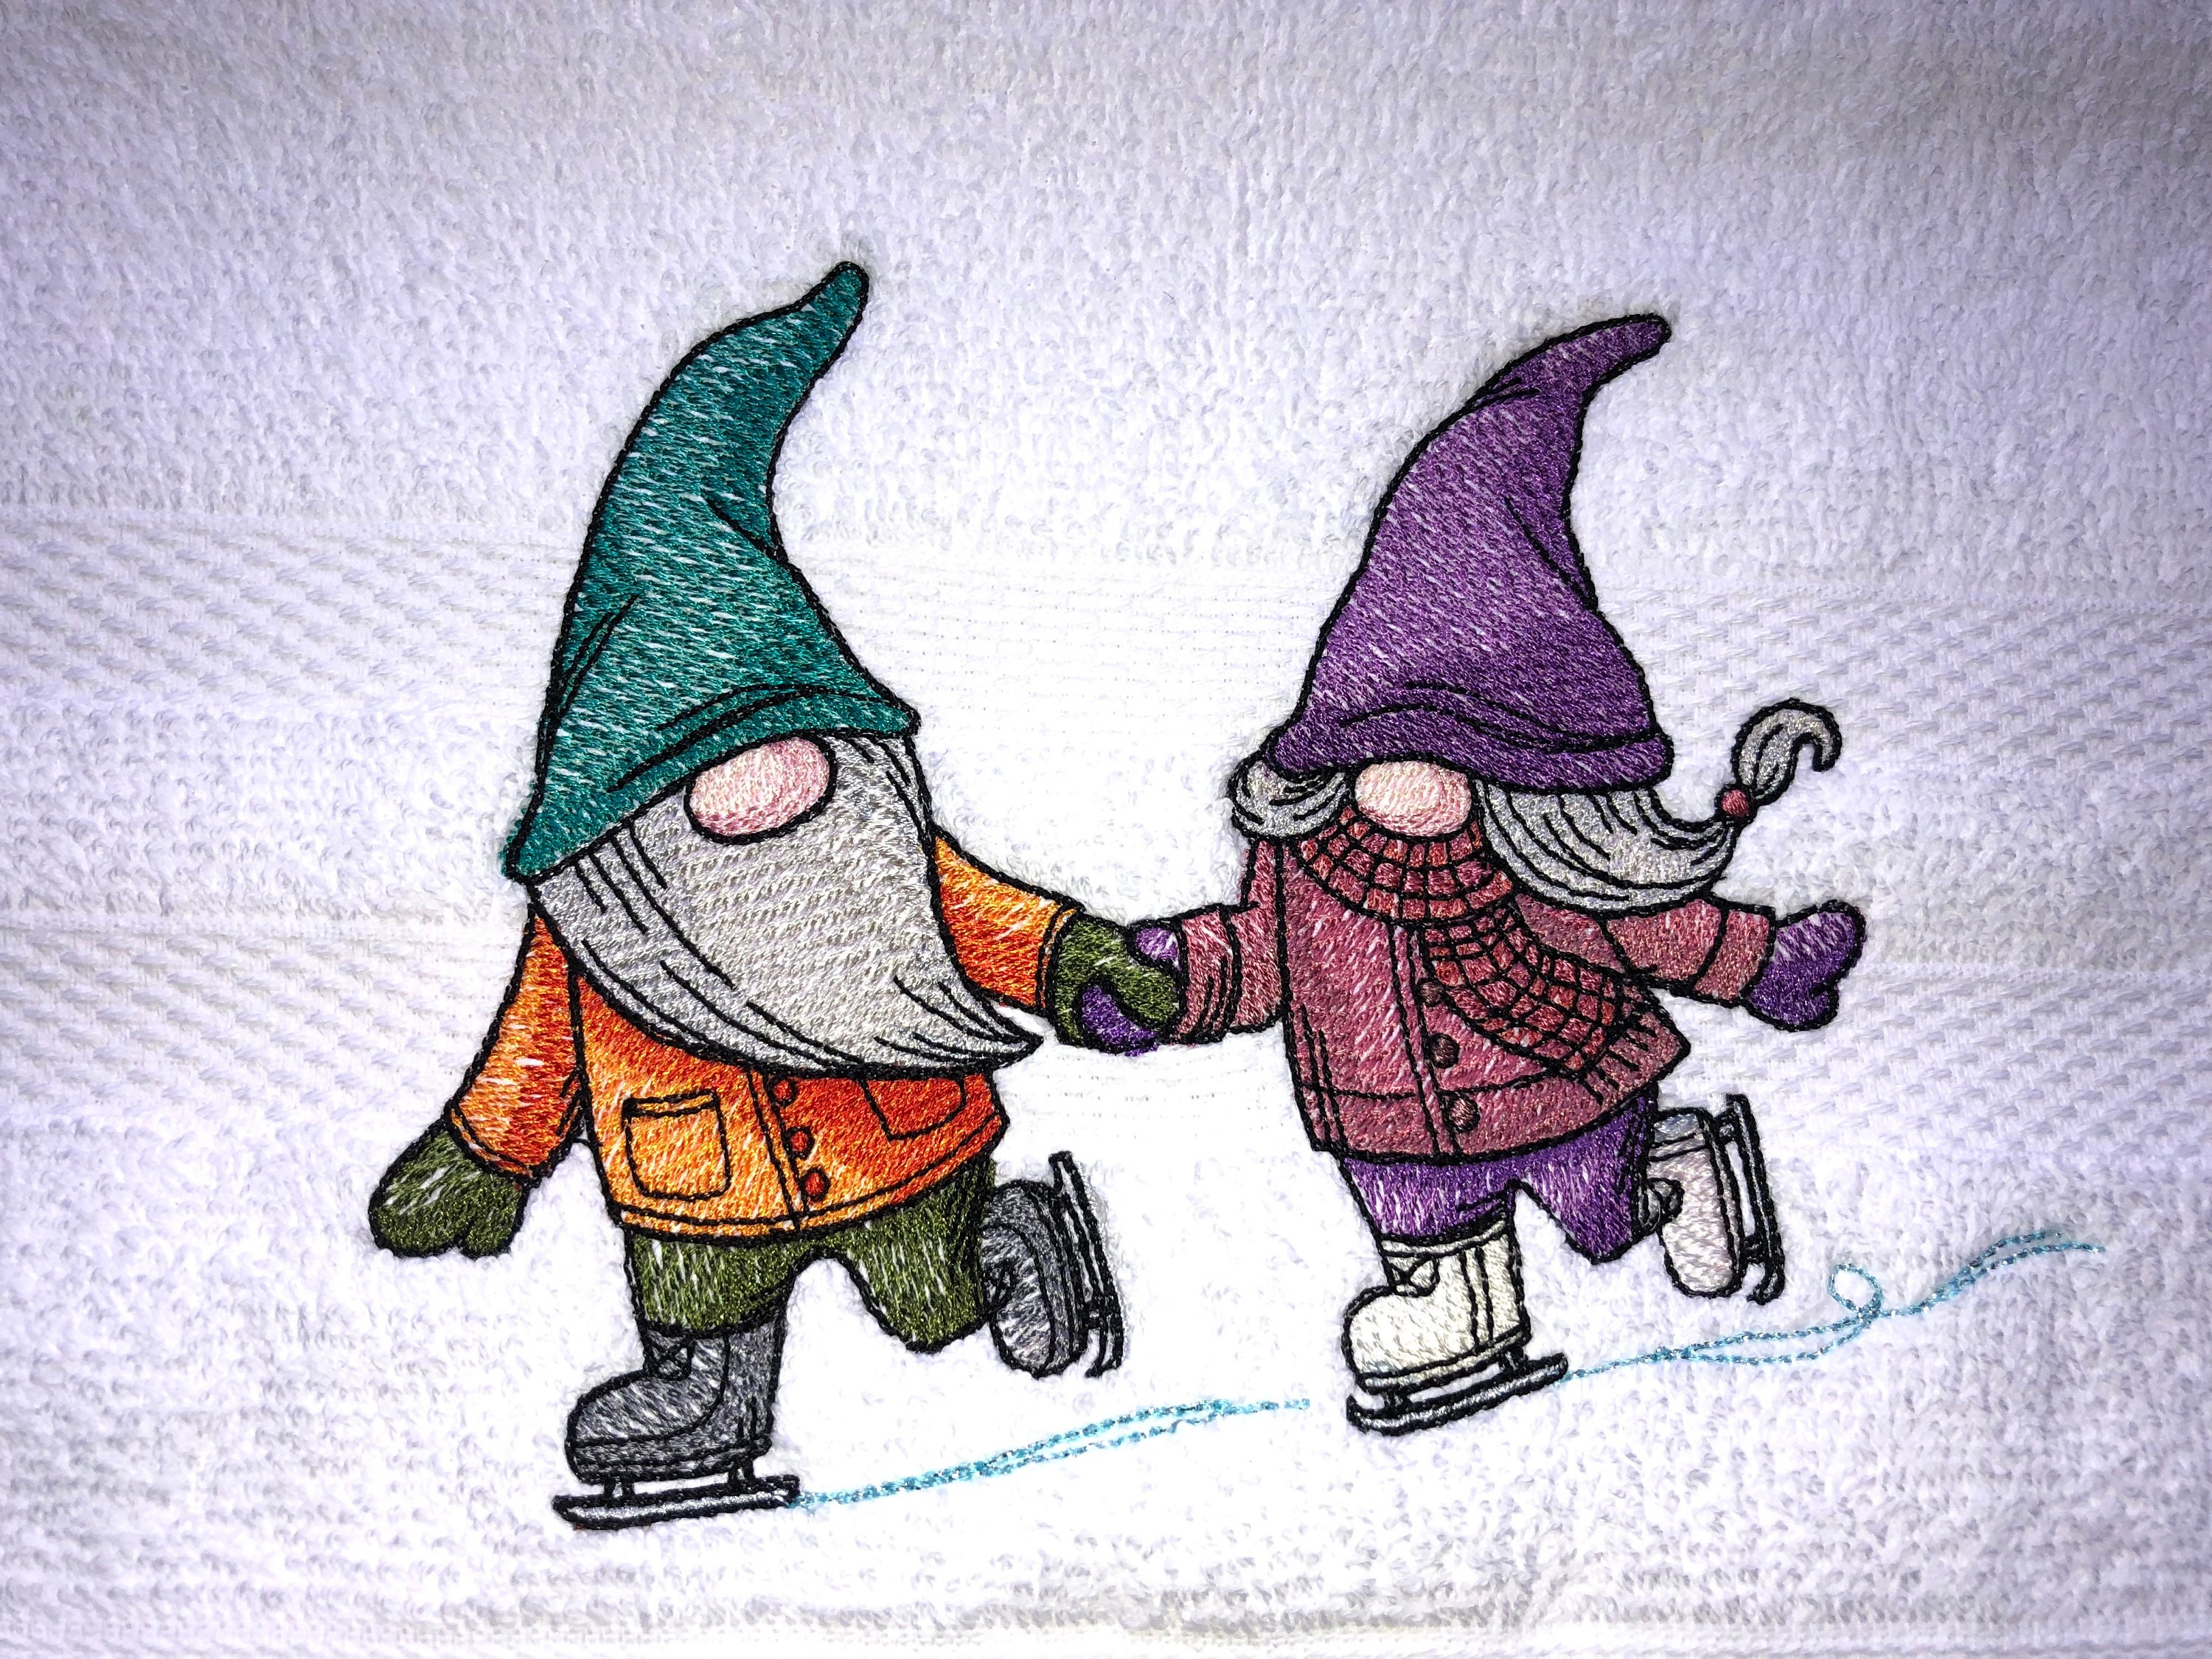 There's gnome one like you - 100% Cotton Flour Sack Kitchen Towel –  Bijouland